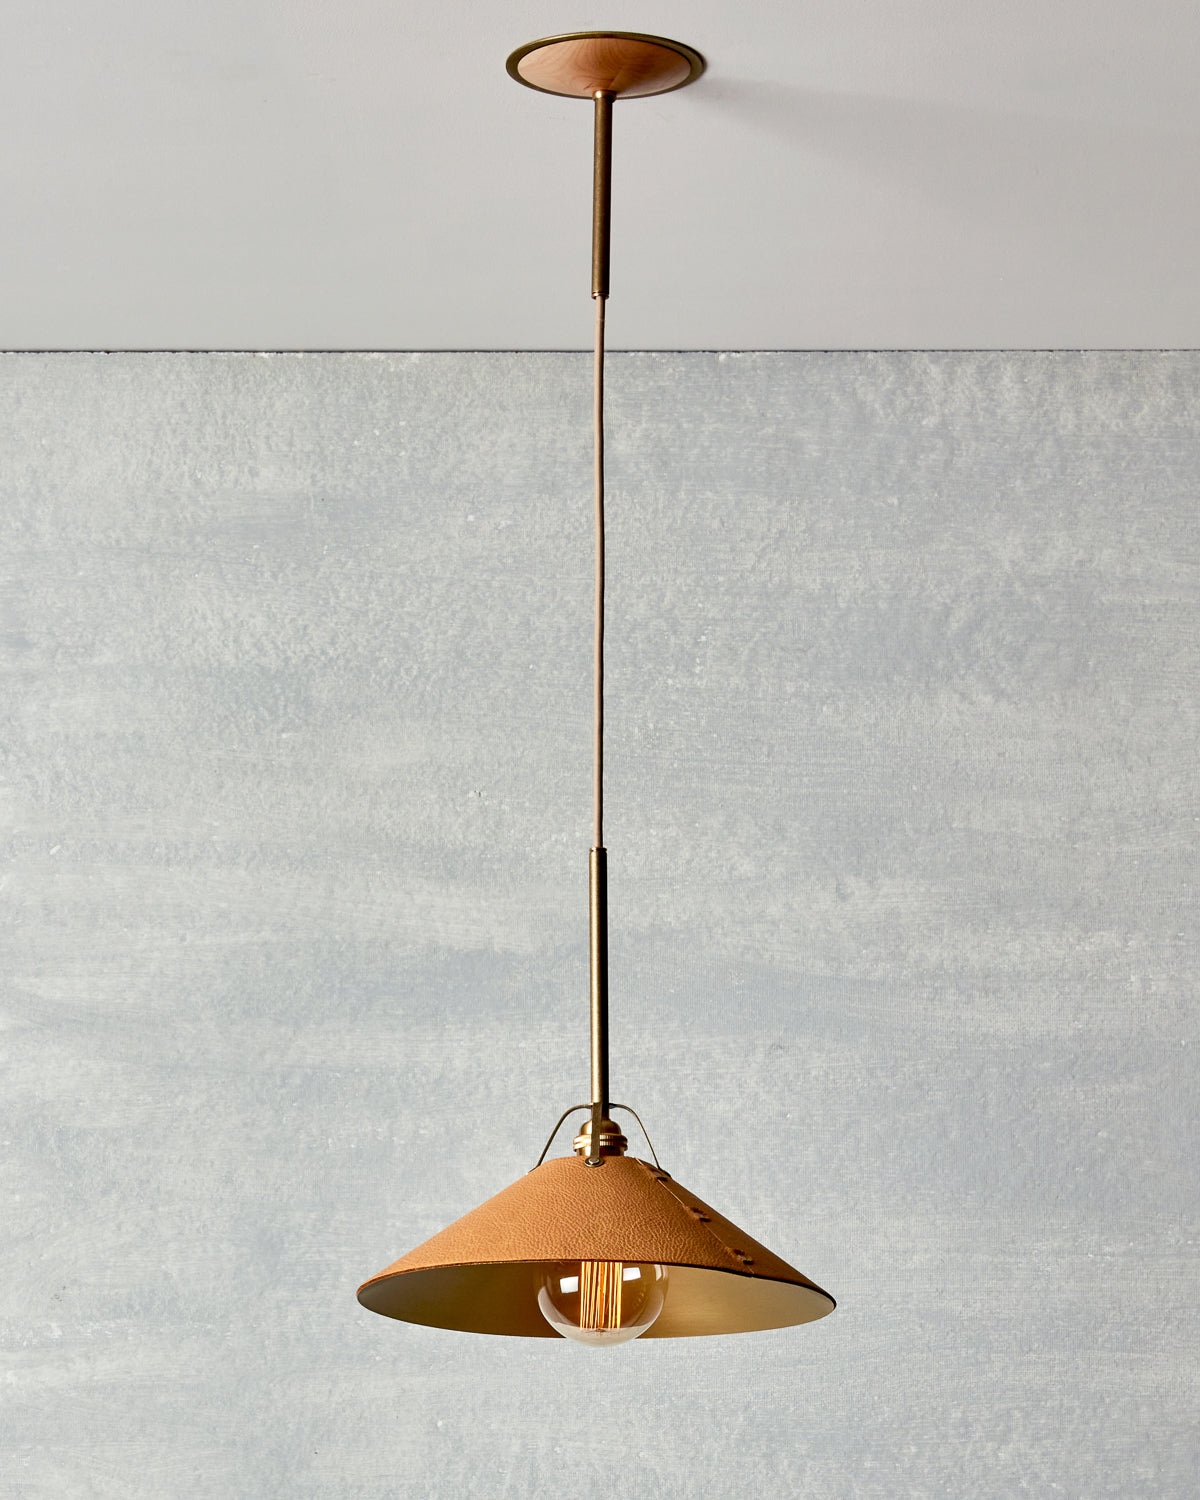 Natural tan leather and brass ceiling pendant light. Made by RTO Lighting in Philadelphia. Hardwired light fixture. Simple interior design, made in the USA.